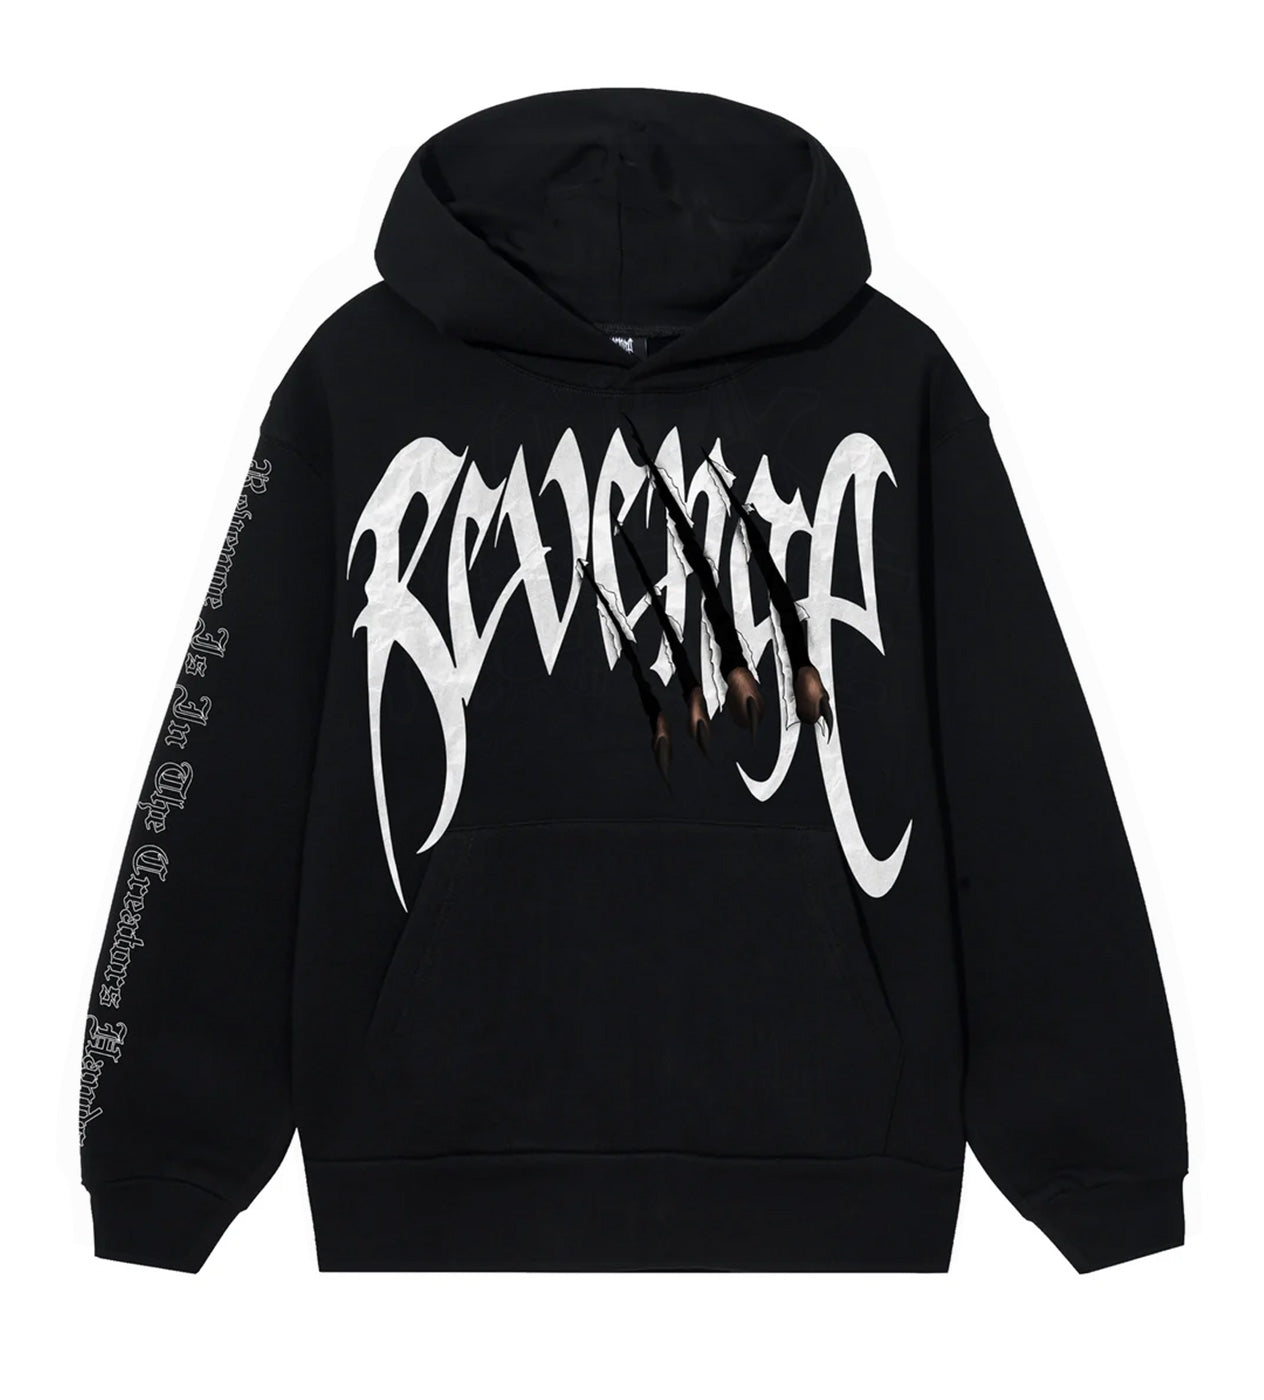 Revenge Arch Logo Claw Hoodie Black/White front view